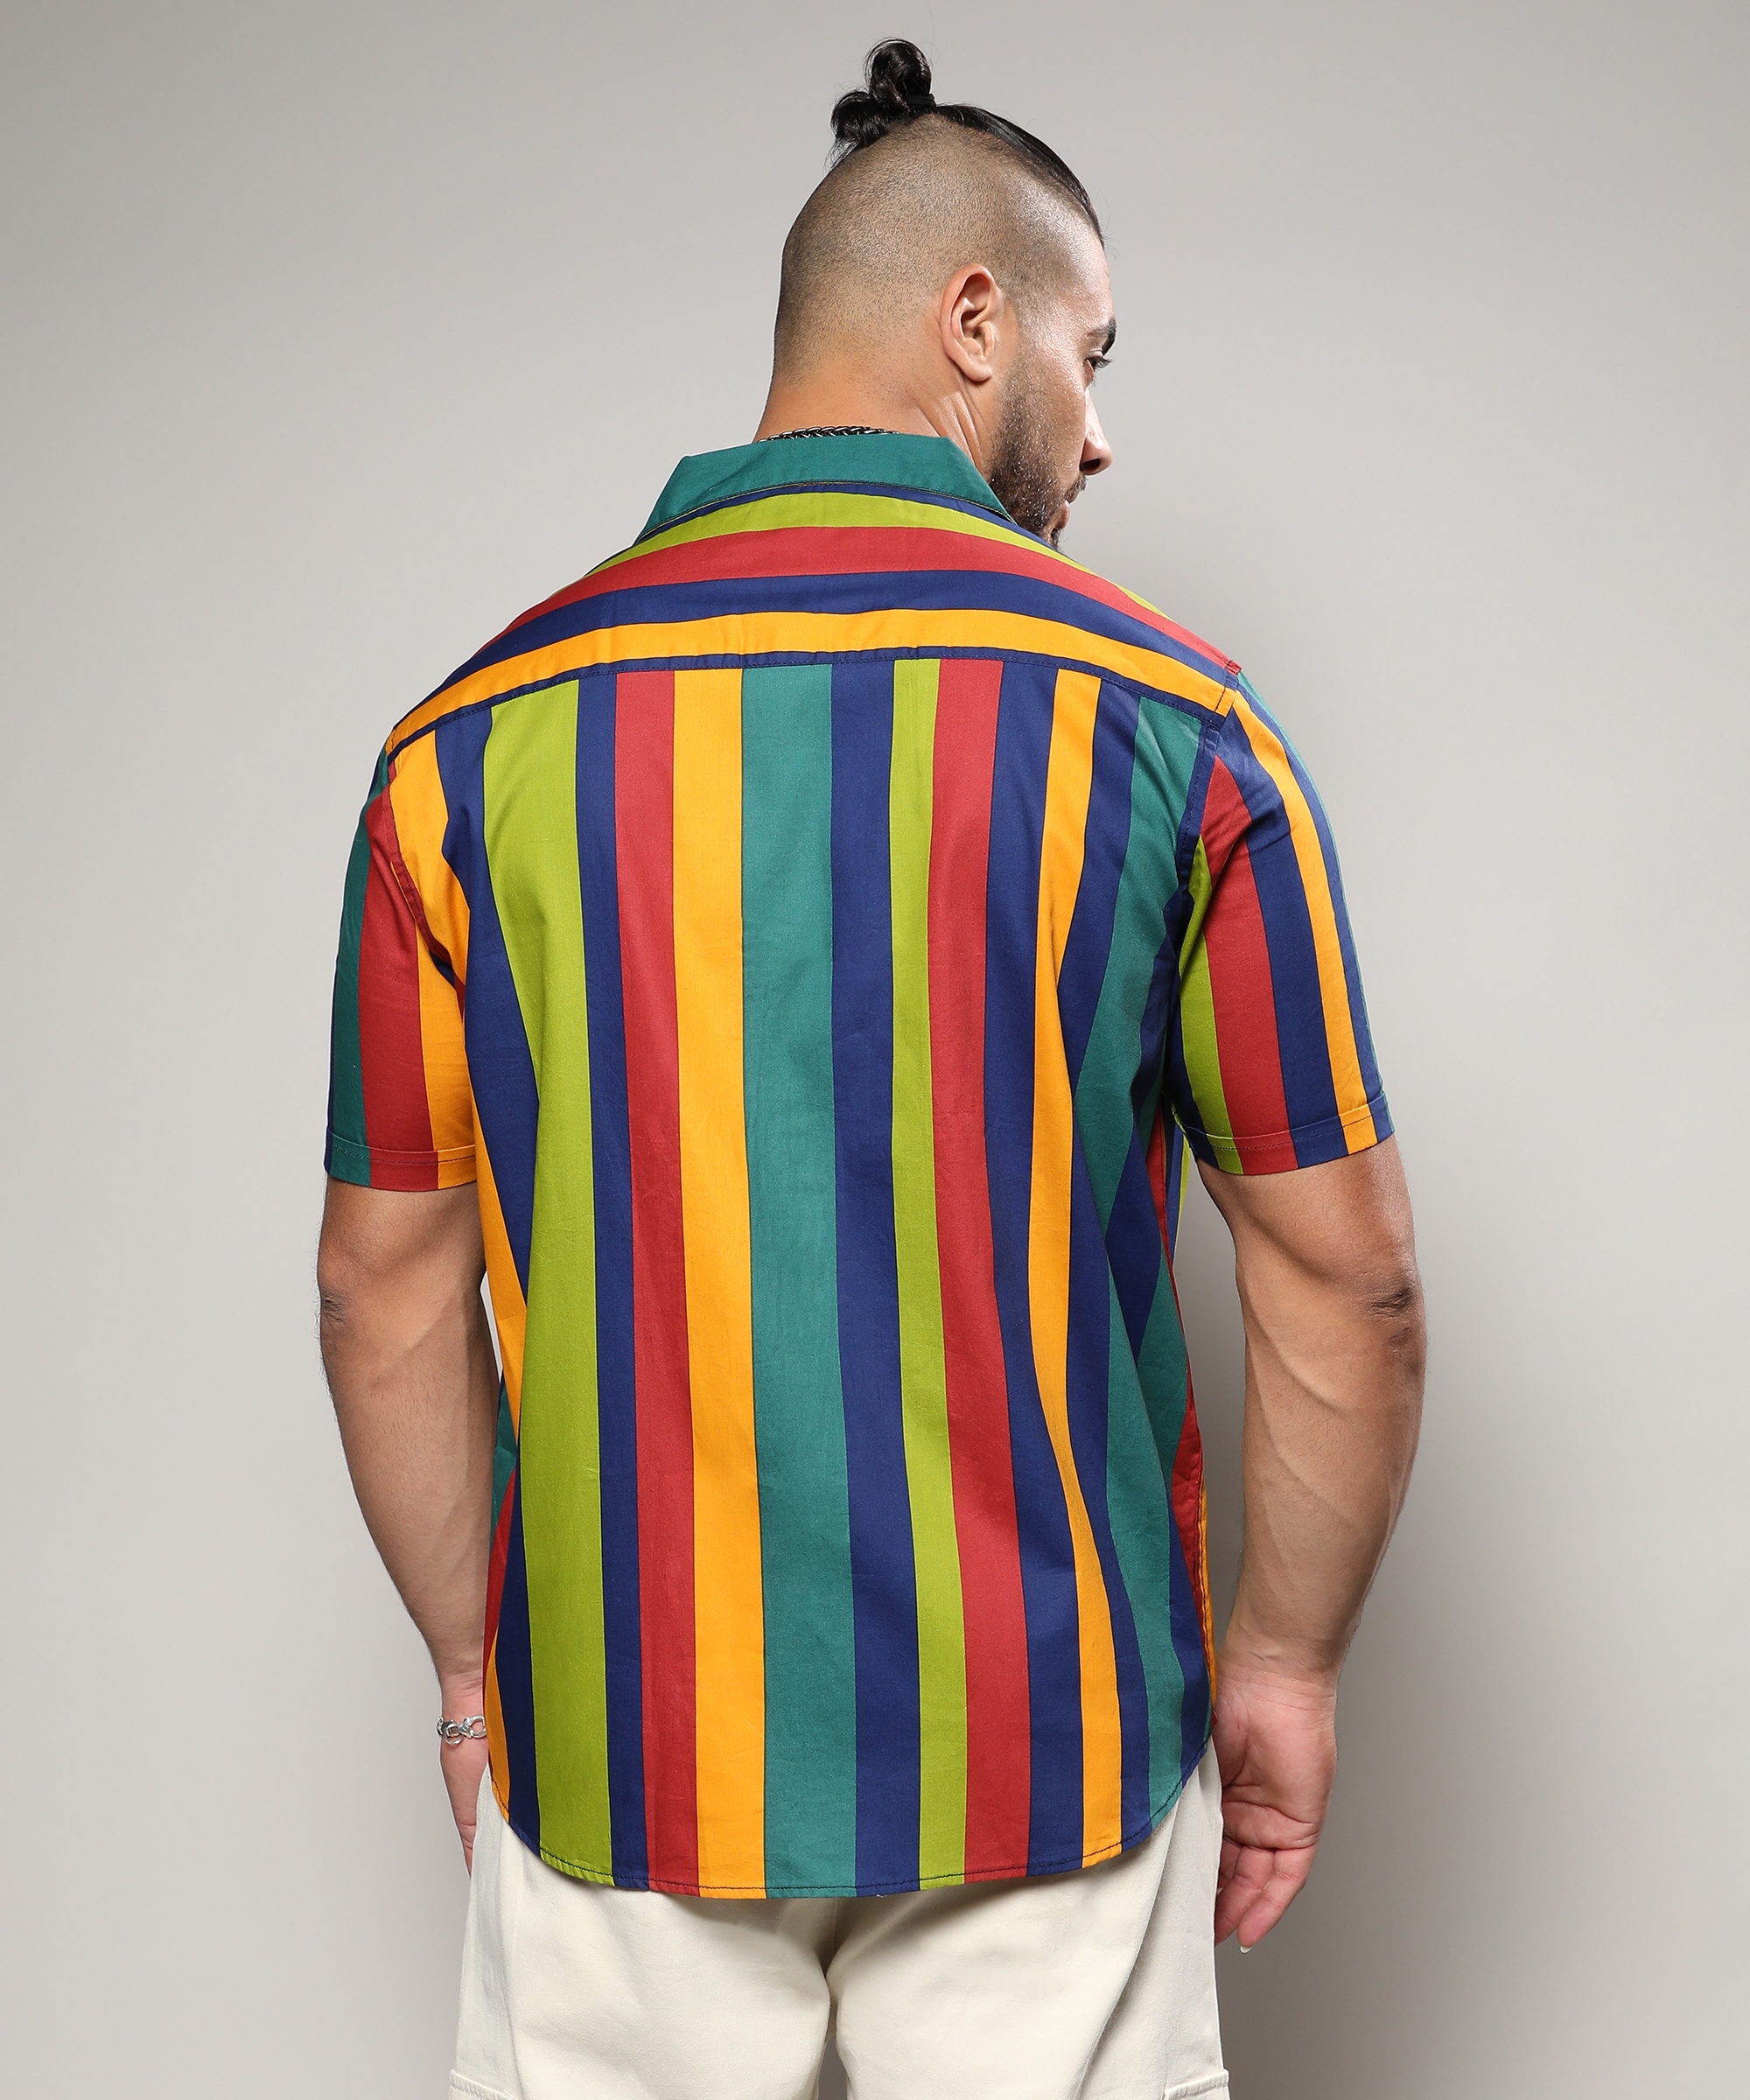 Men's Multicolour Awning Striped Shirt